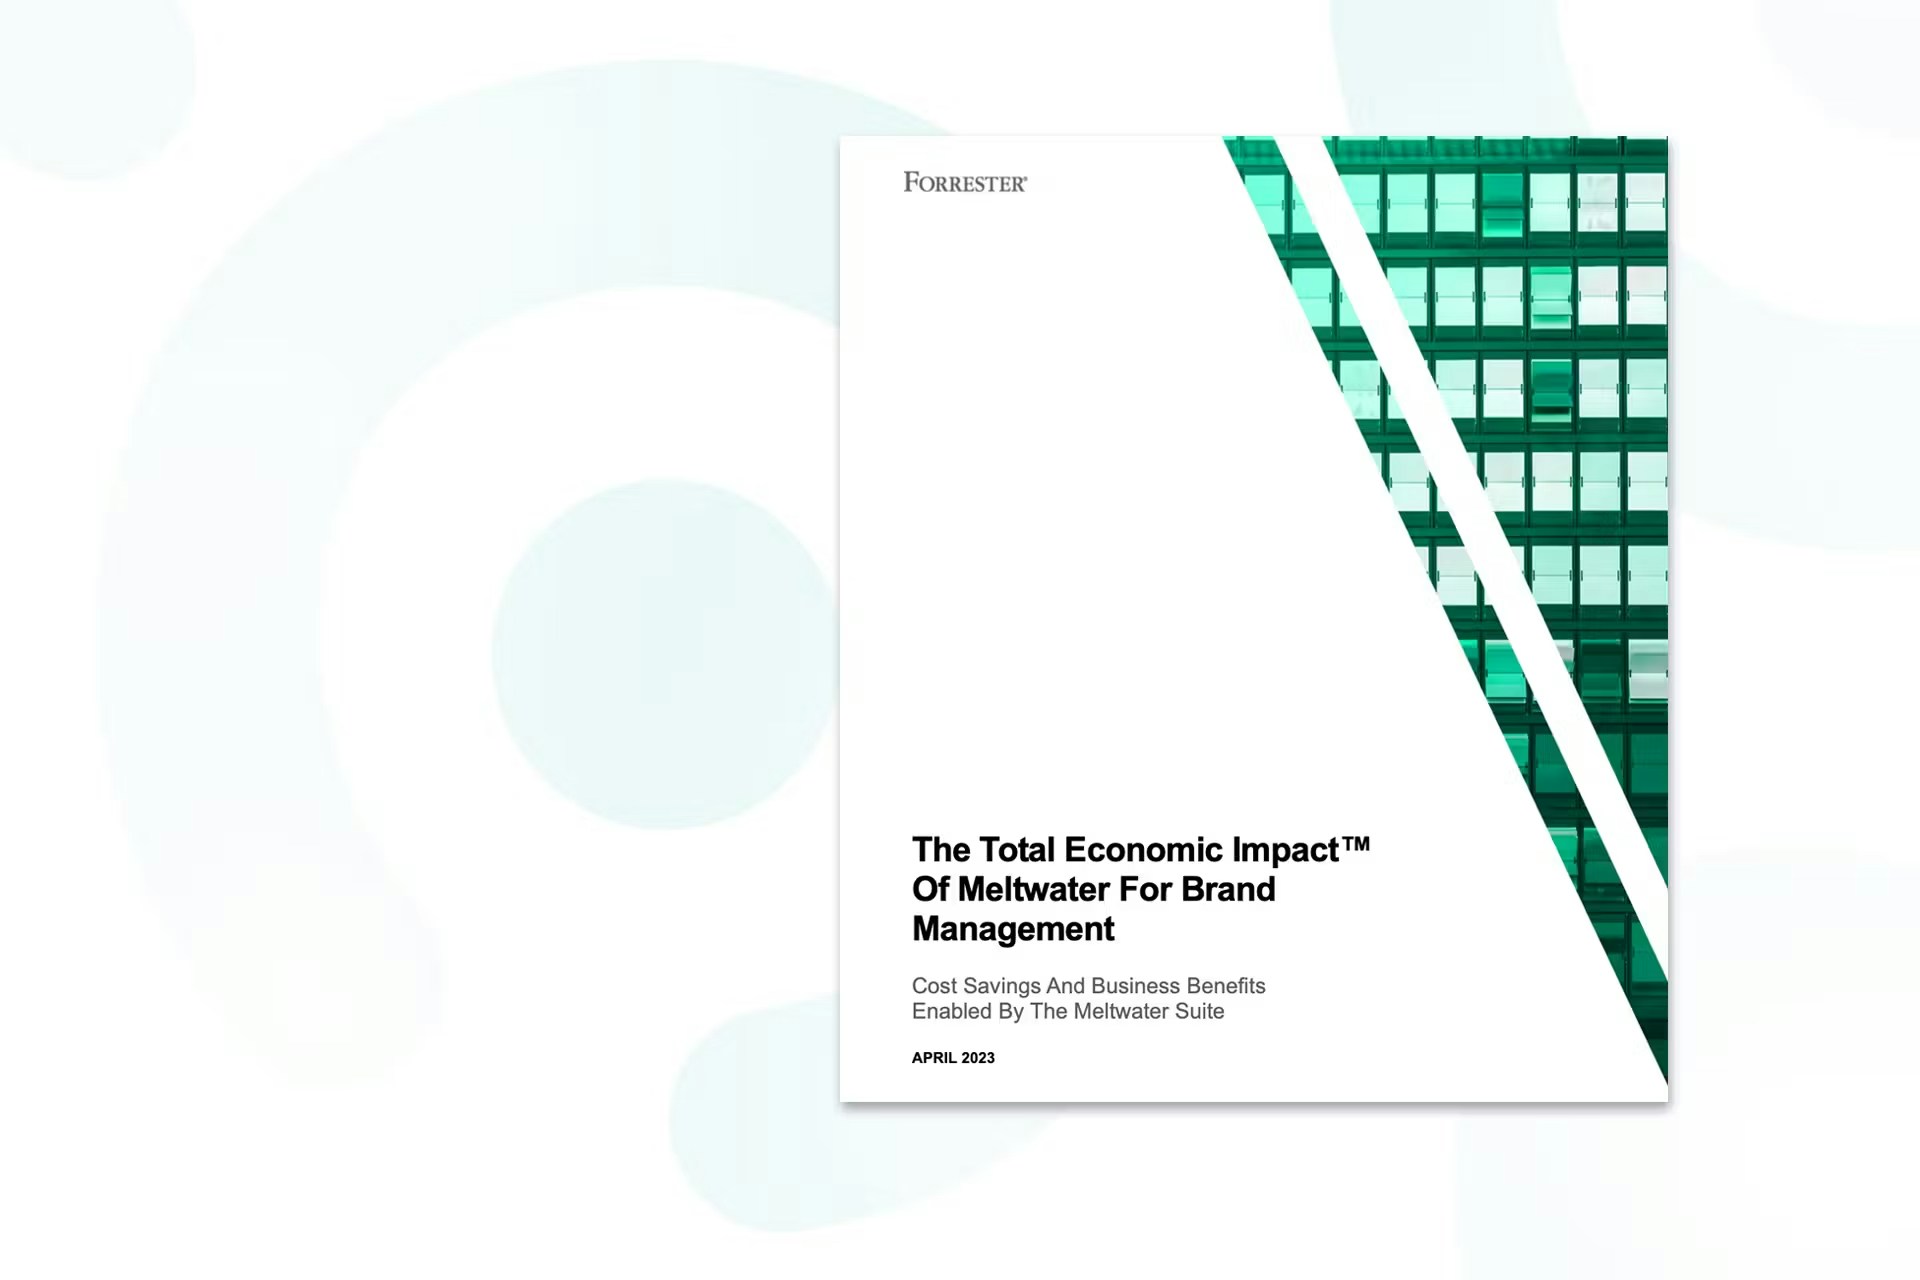 The Total Economic Impact™ of Meltwater for Brand Management